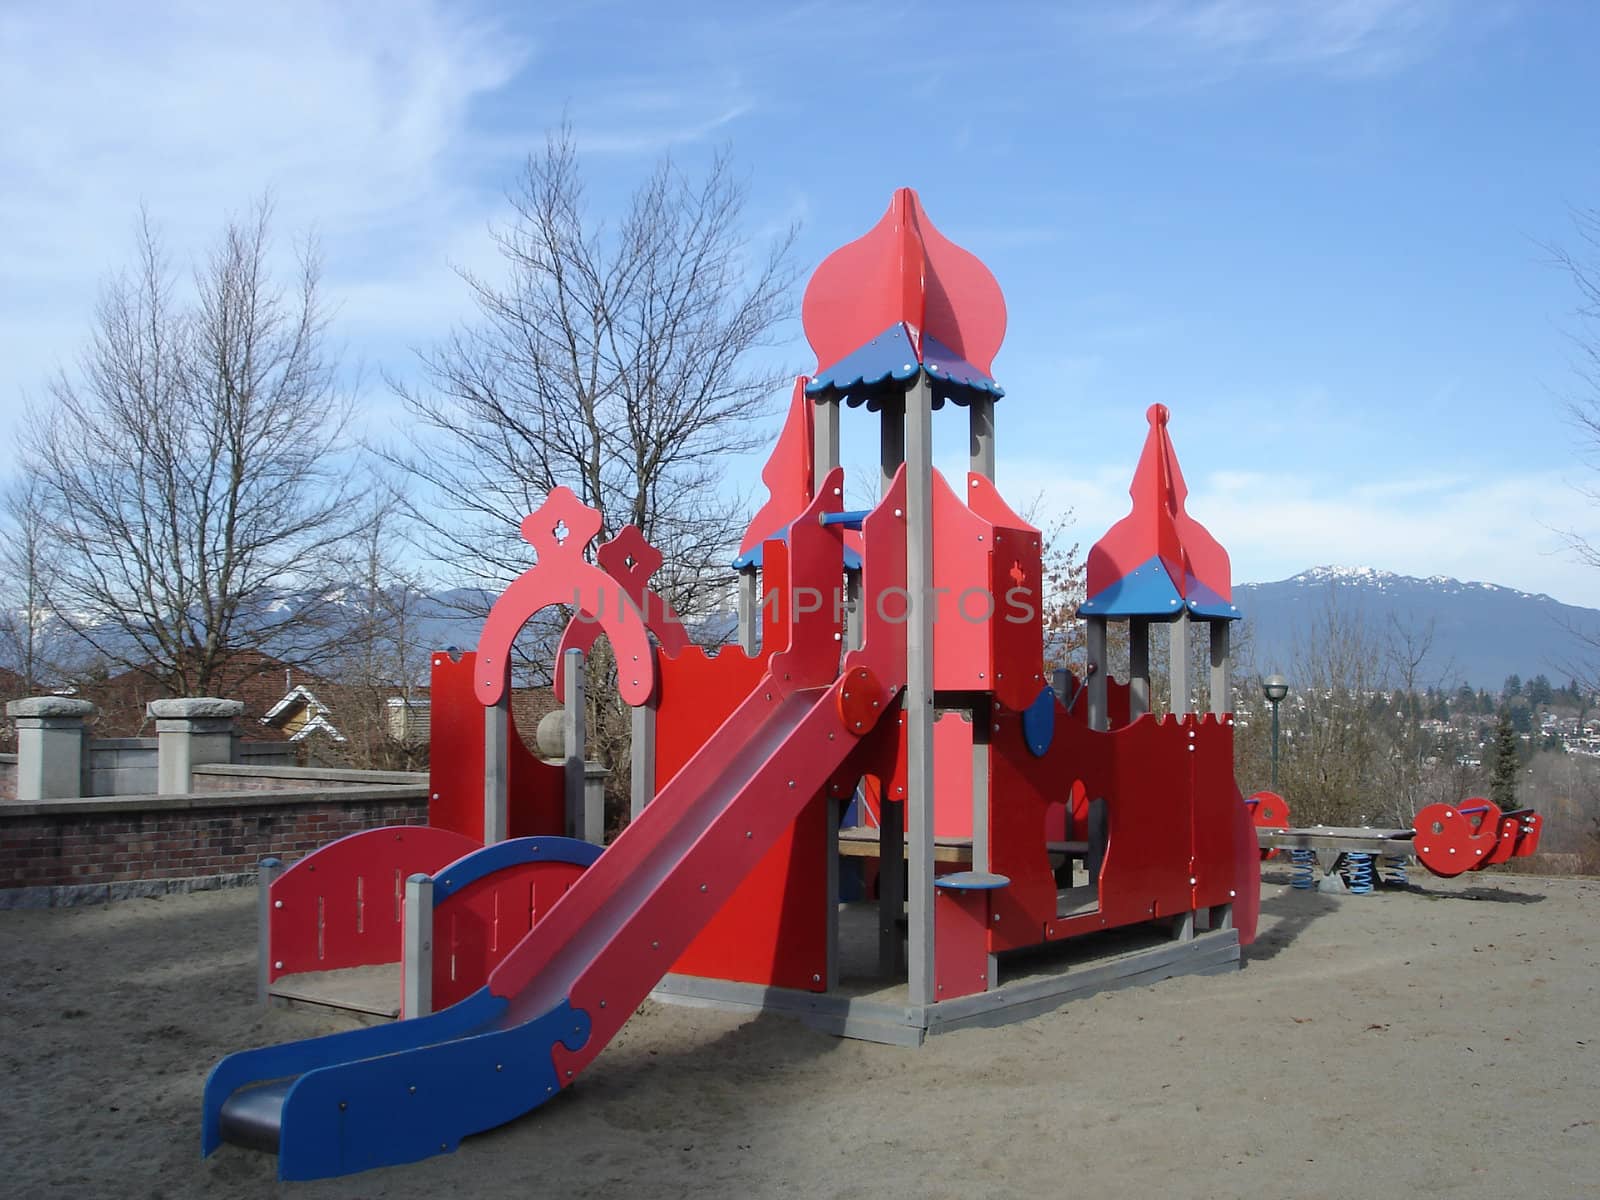 Red Colored Playground In A Park